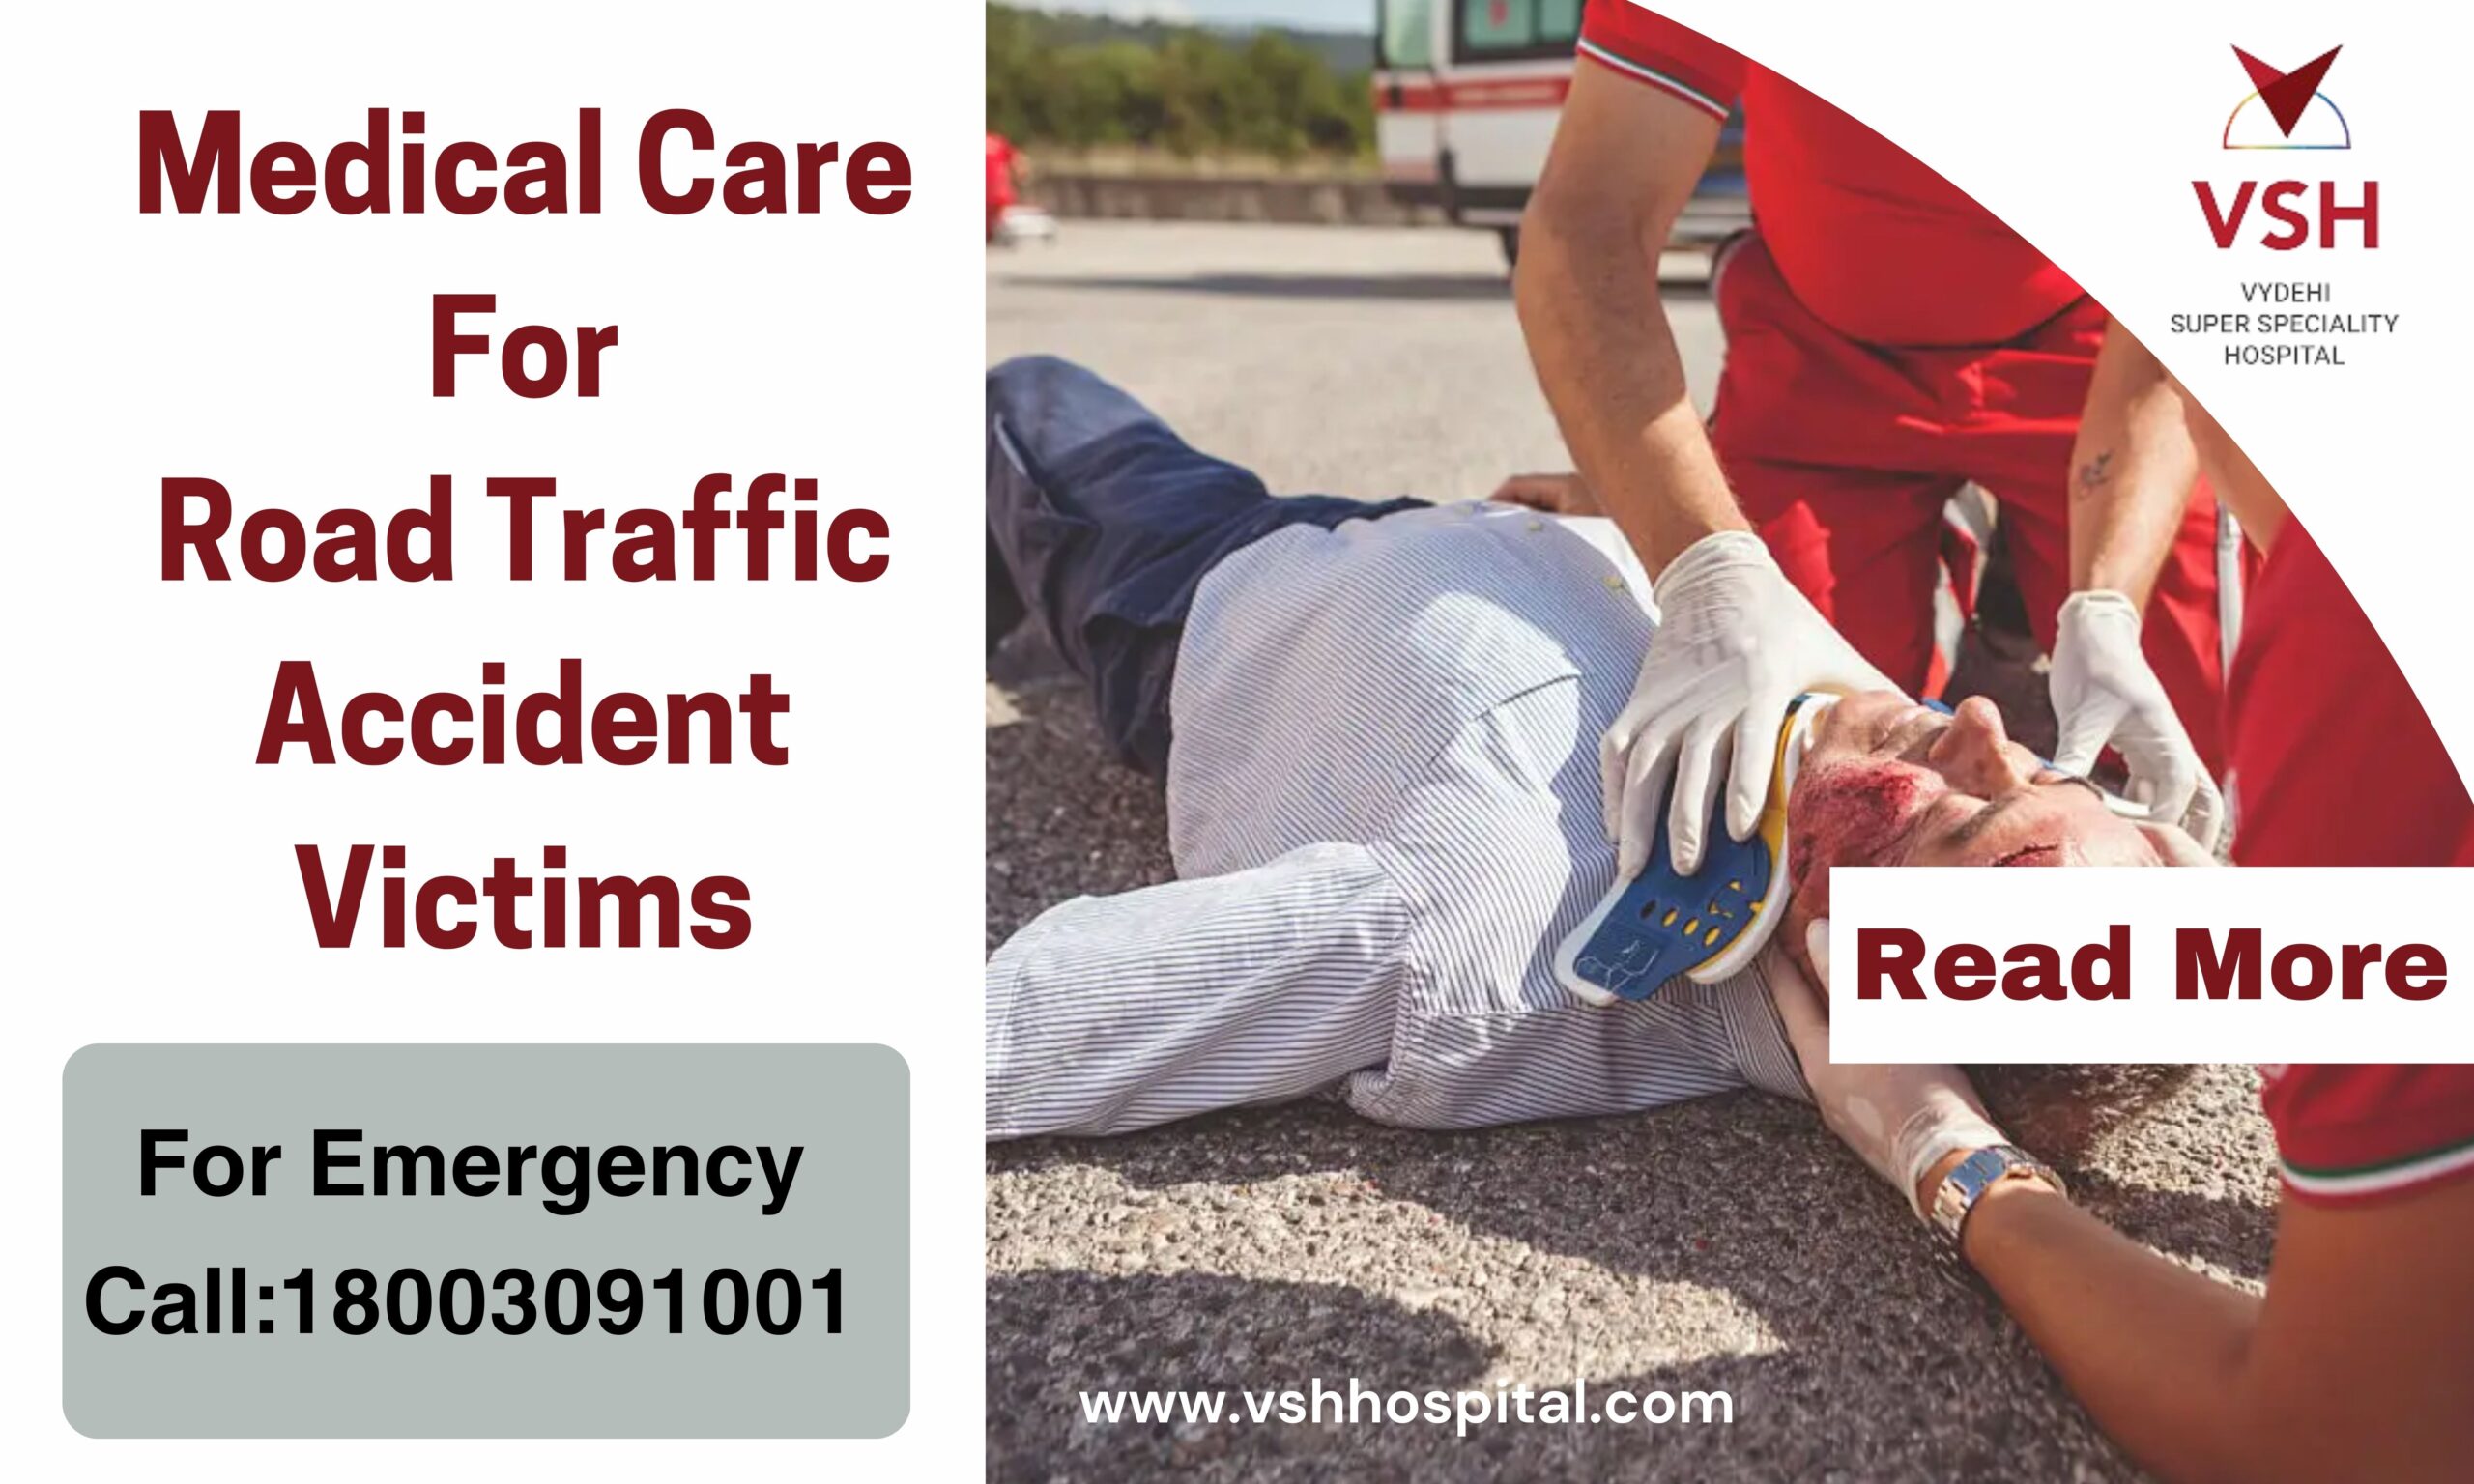 Emergency medical services